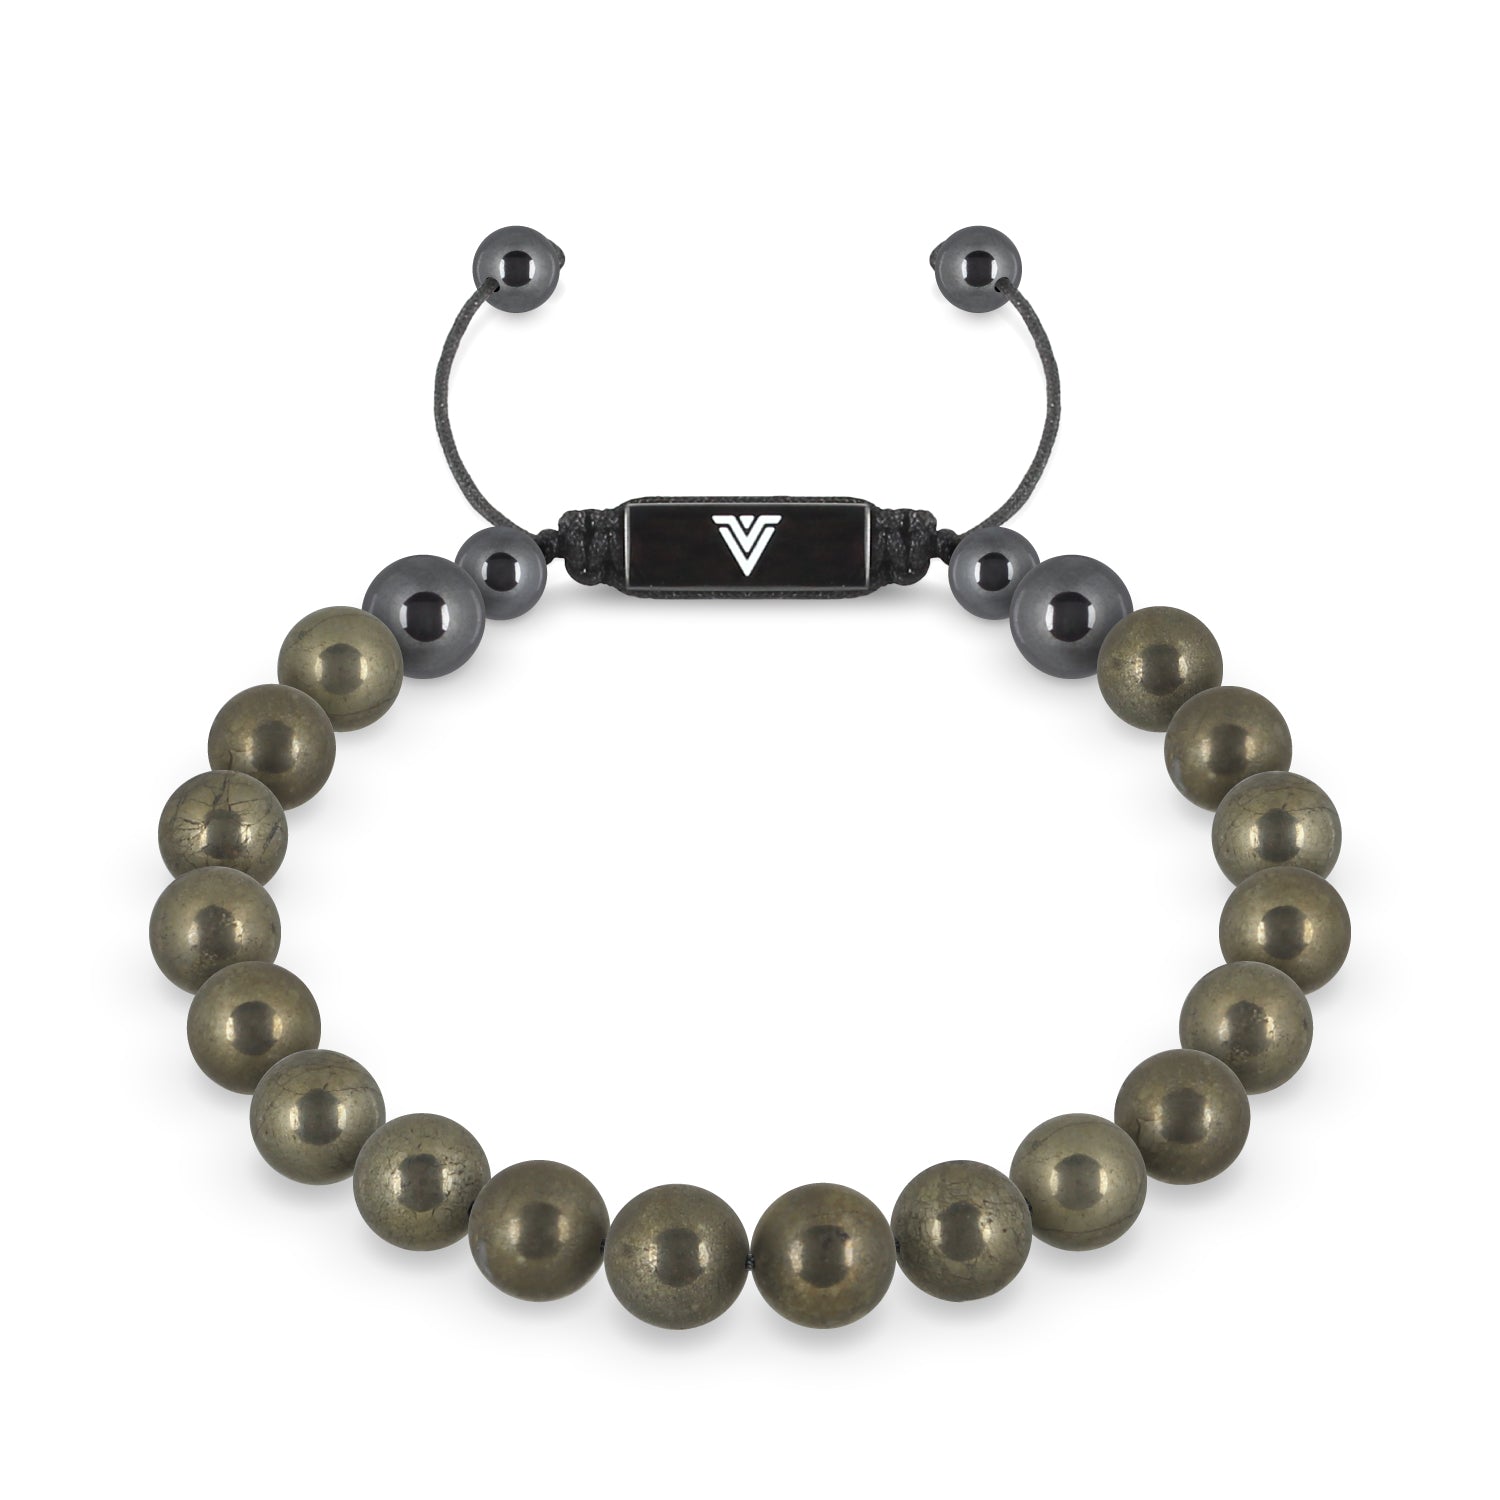 Front view of an 8mm Pyrite crystal beaded shamballa bracelet with black stainless steel logo bead made by Voltlin